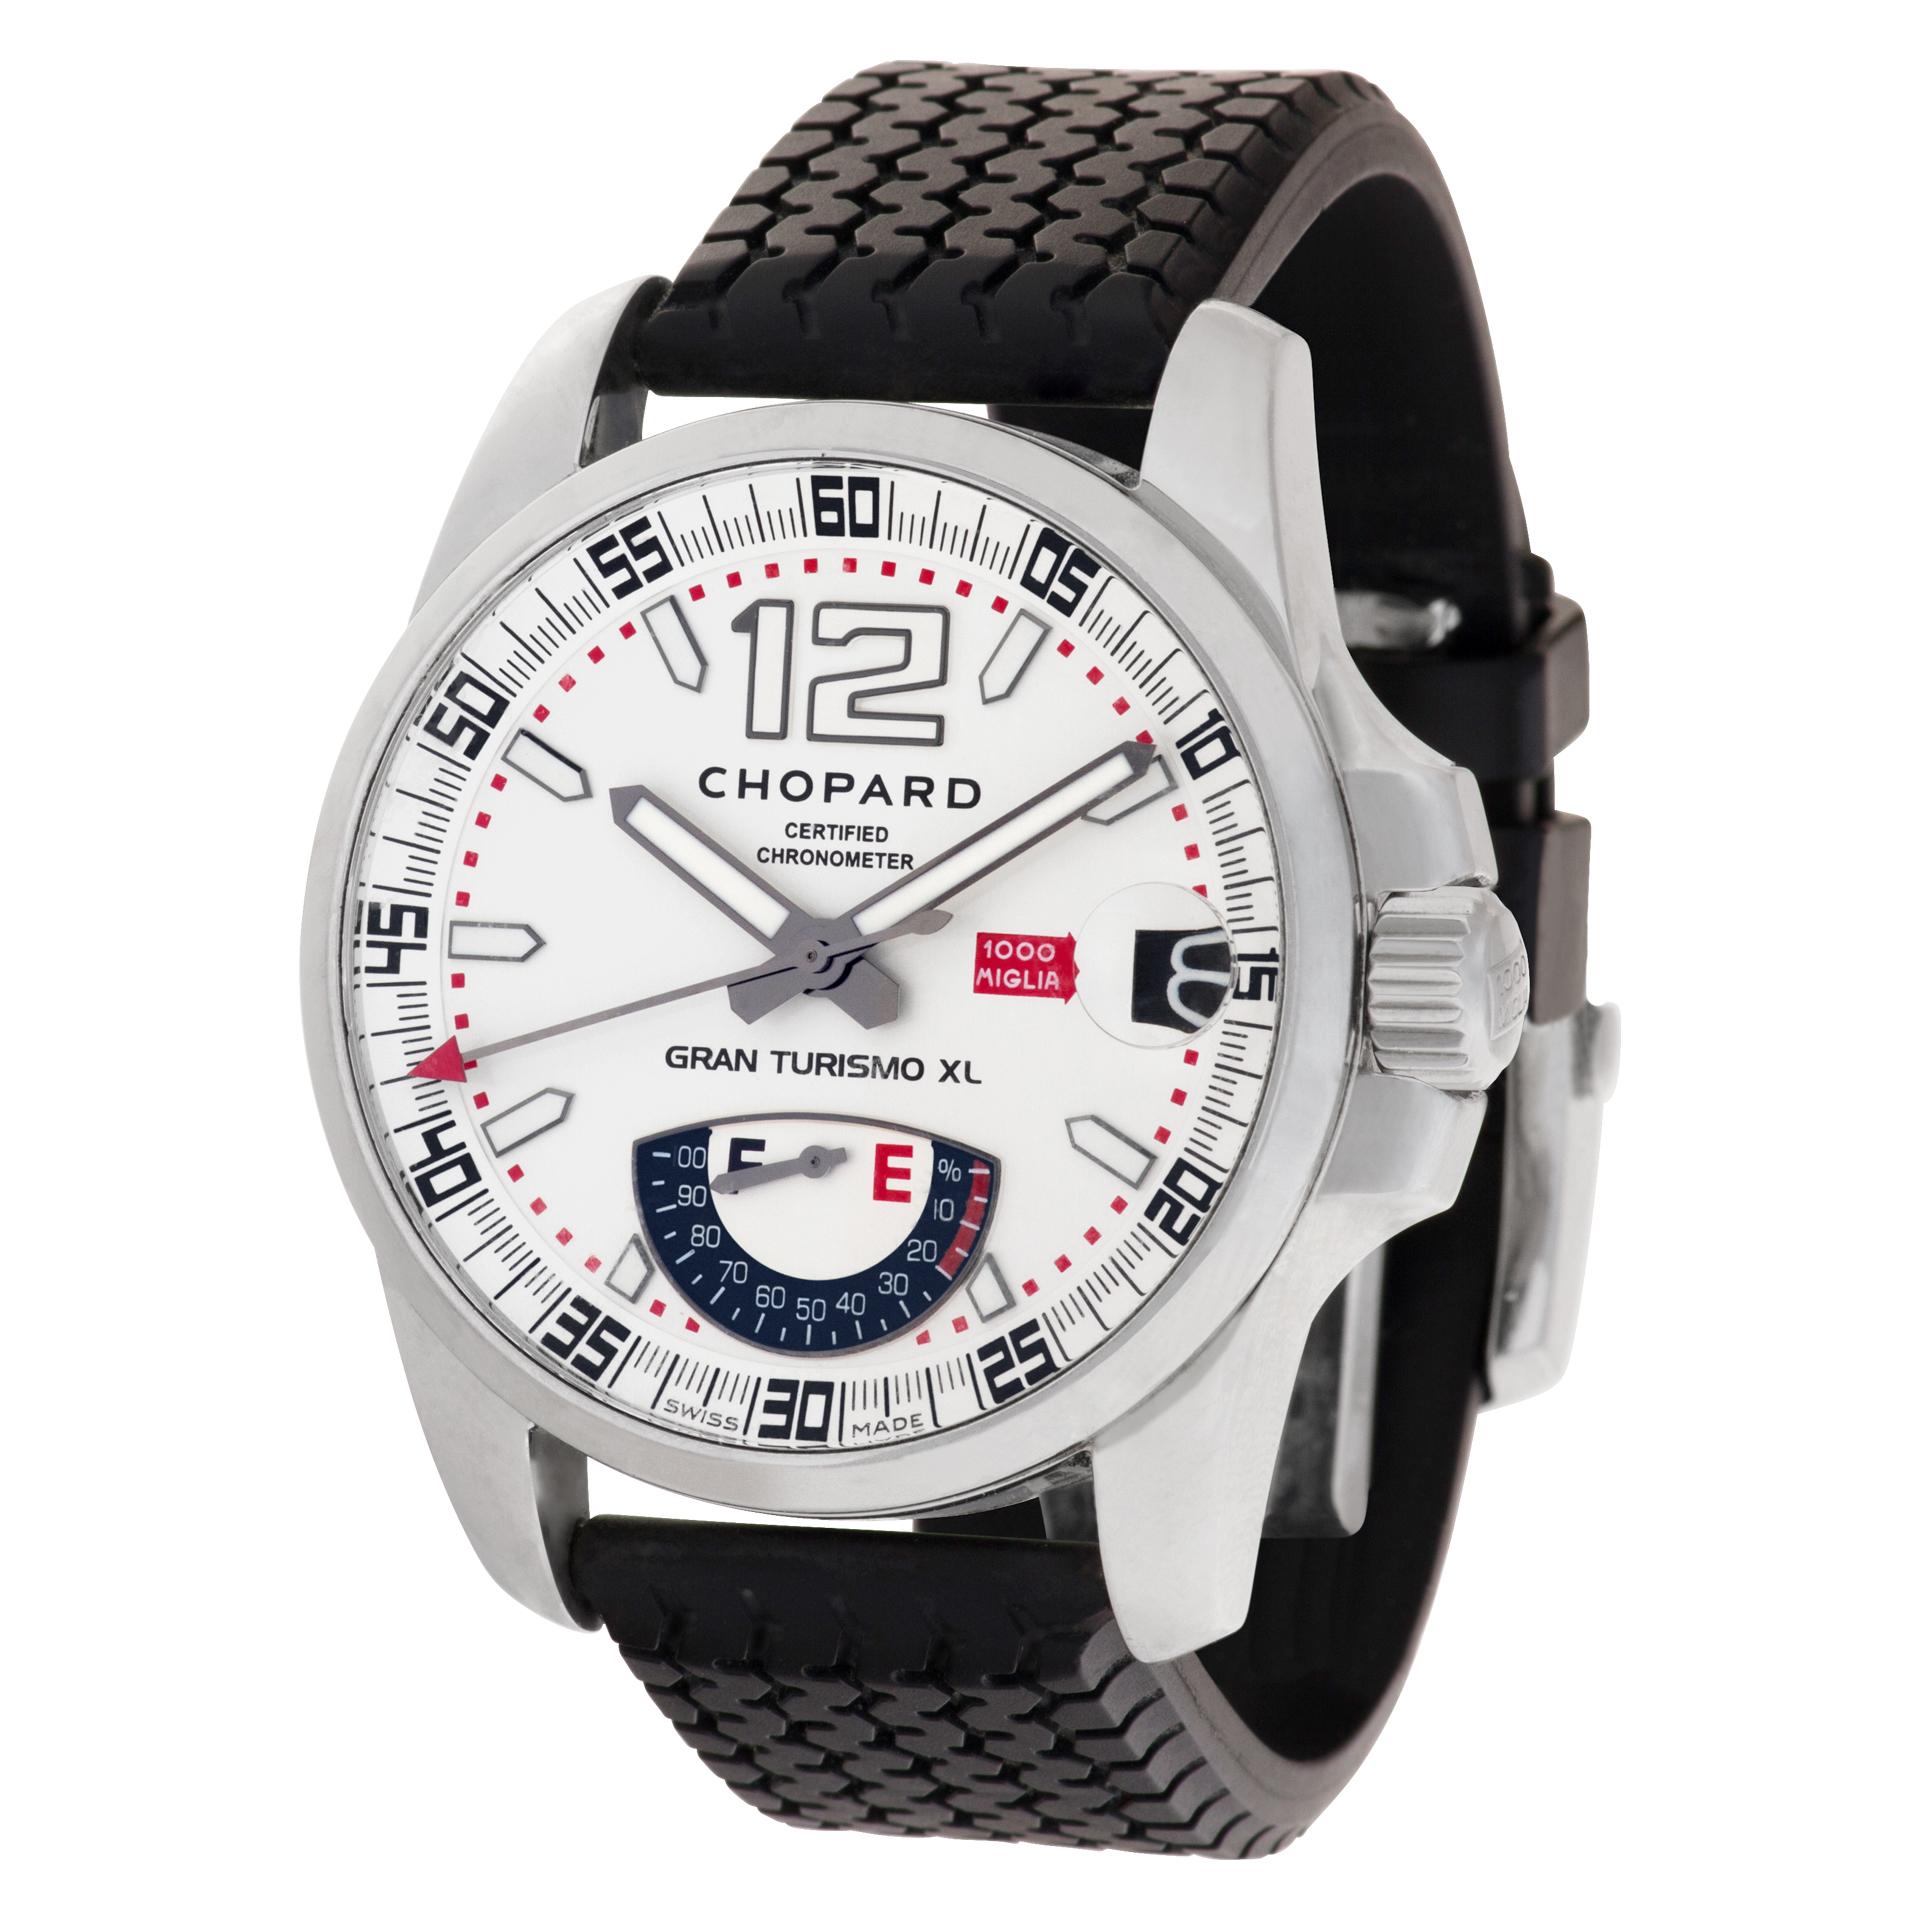 Chopard Mille Miglia in stainless steel on a rubber strap. Auto w/ sweep seconds, date and power reserve. 44 mm case size. Ref 8997. Circa 2010s. Fine Pre-owned Chopard Watch.   Certified preowned Classic Chopard Mille Miglia 8997 watch is made out